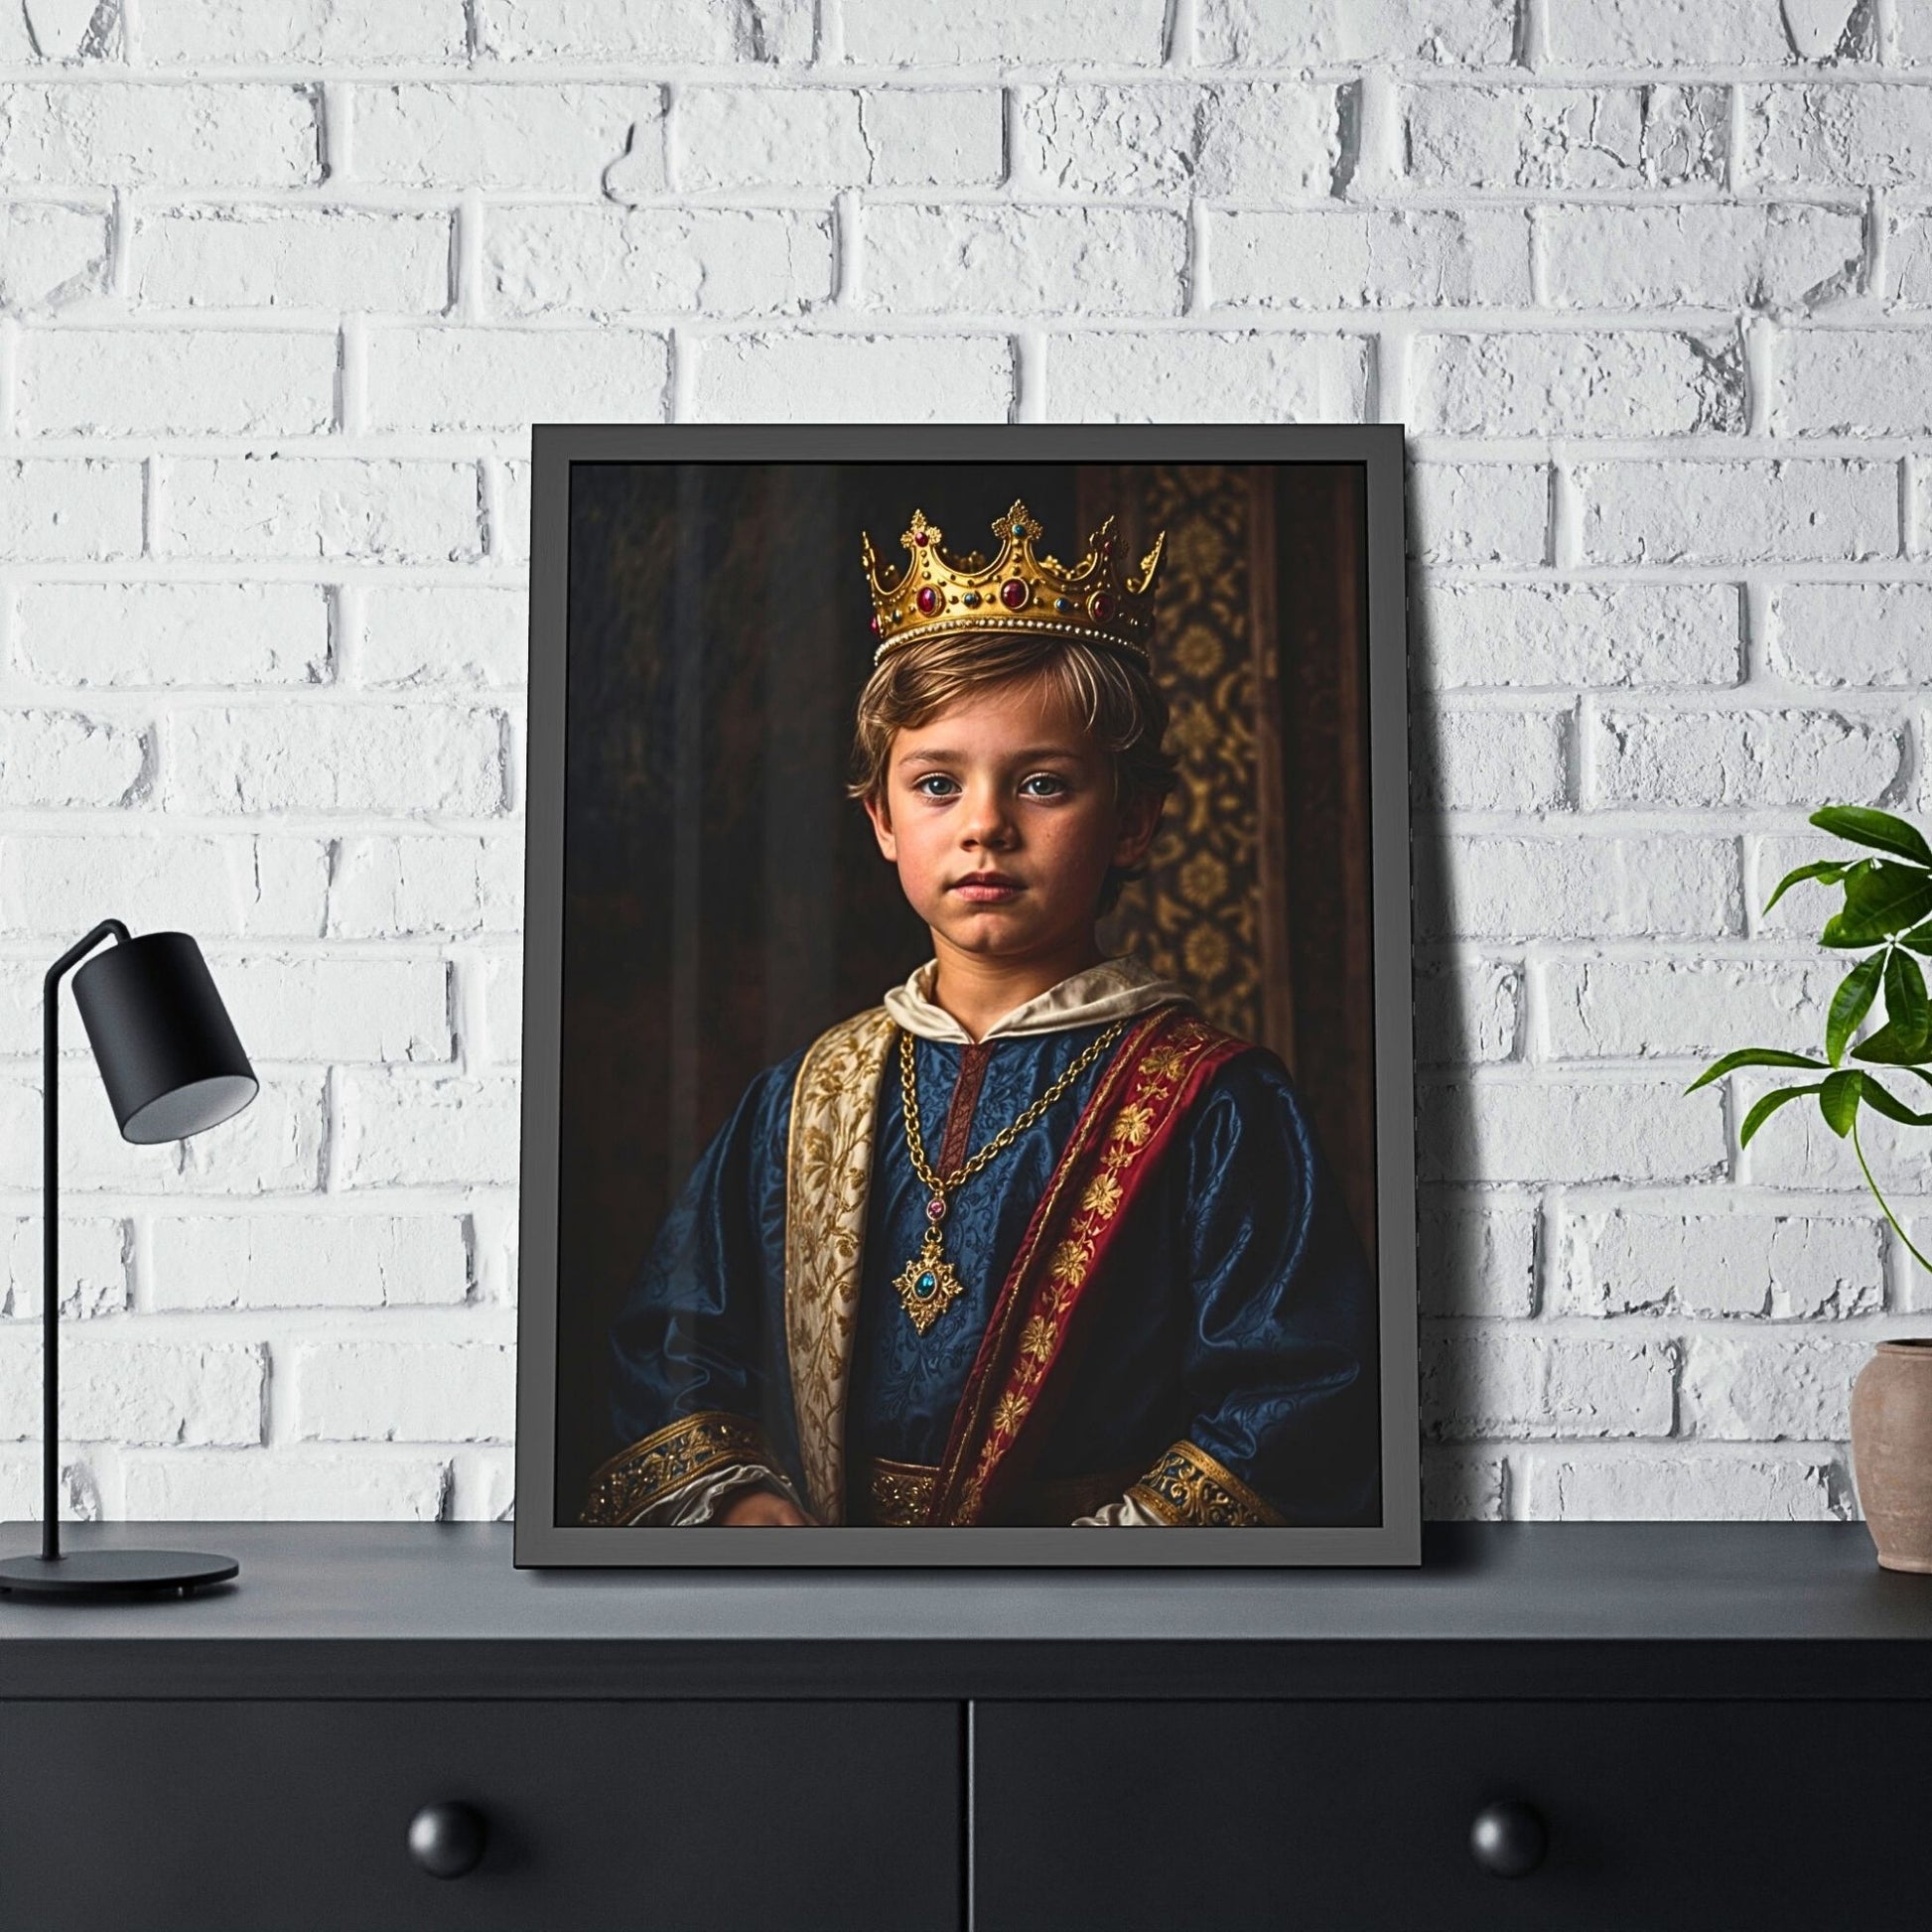 Kids Royal Custom Portrait: Personalized Little King Portrait from Photo, Perfect Birthday Gift for Boys. A20.1